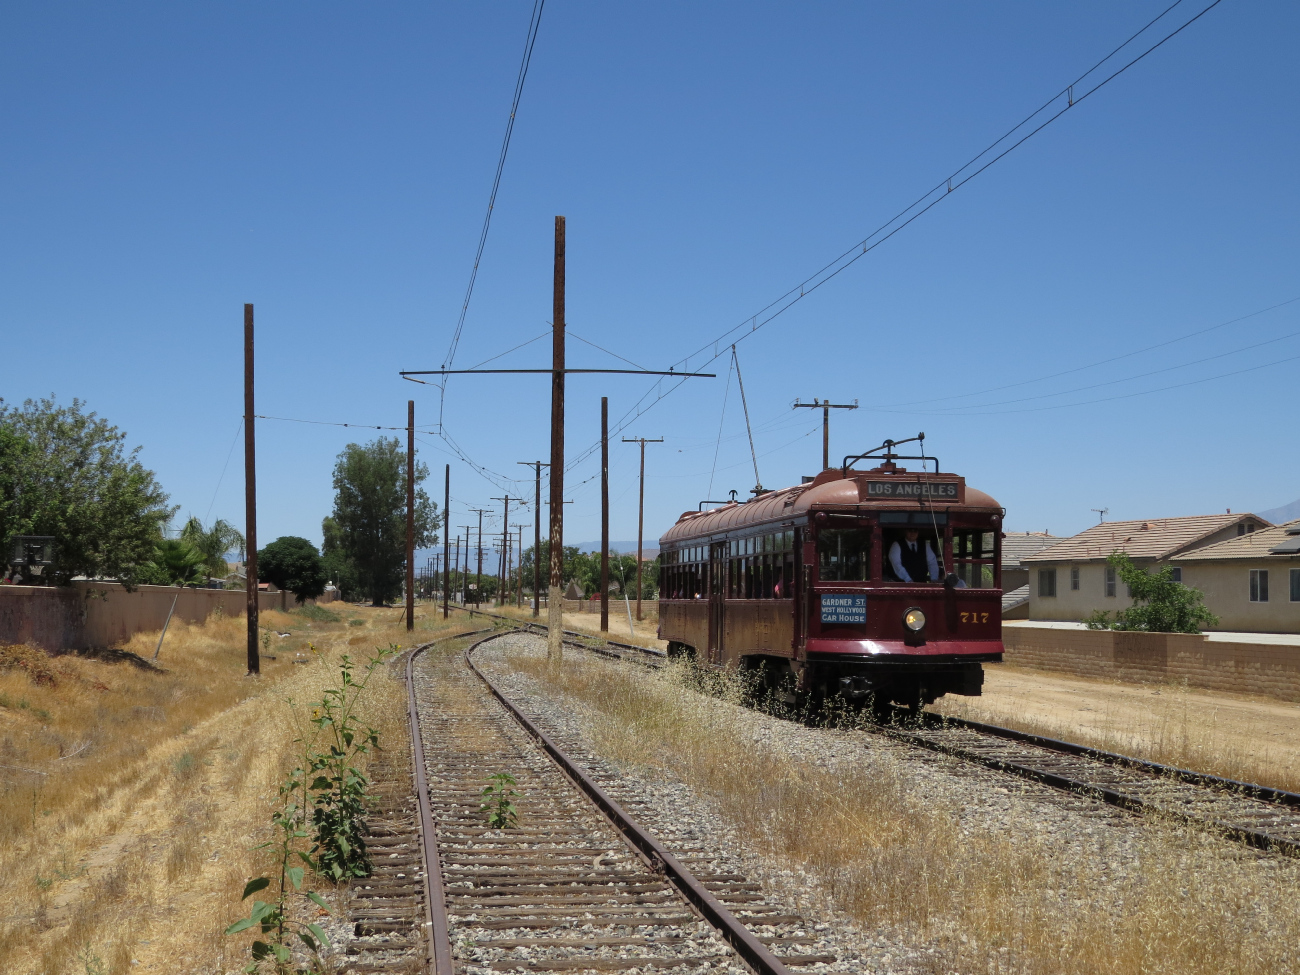 Perris, Brill "Hollywood car" № 717; Perris — Tramway Lines and Infrastructure